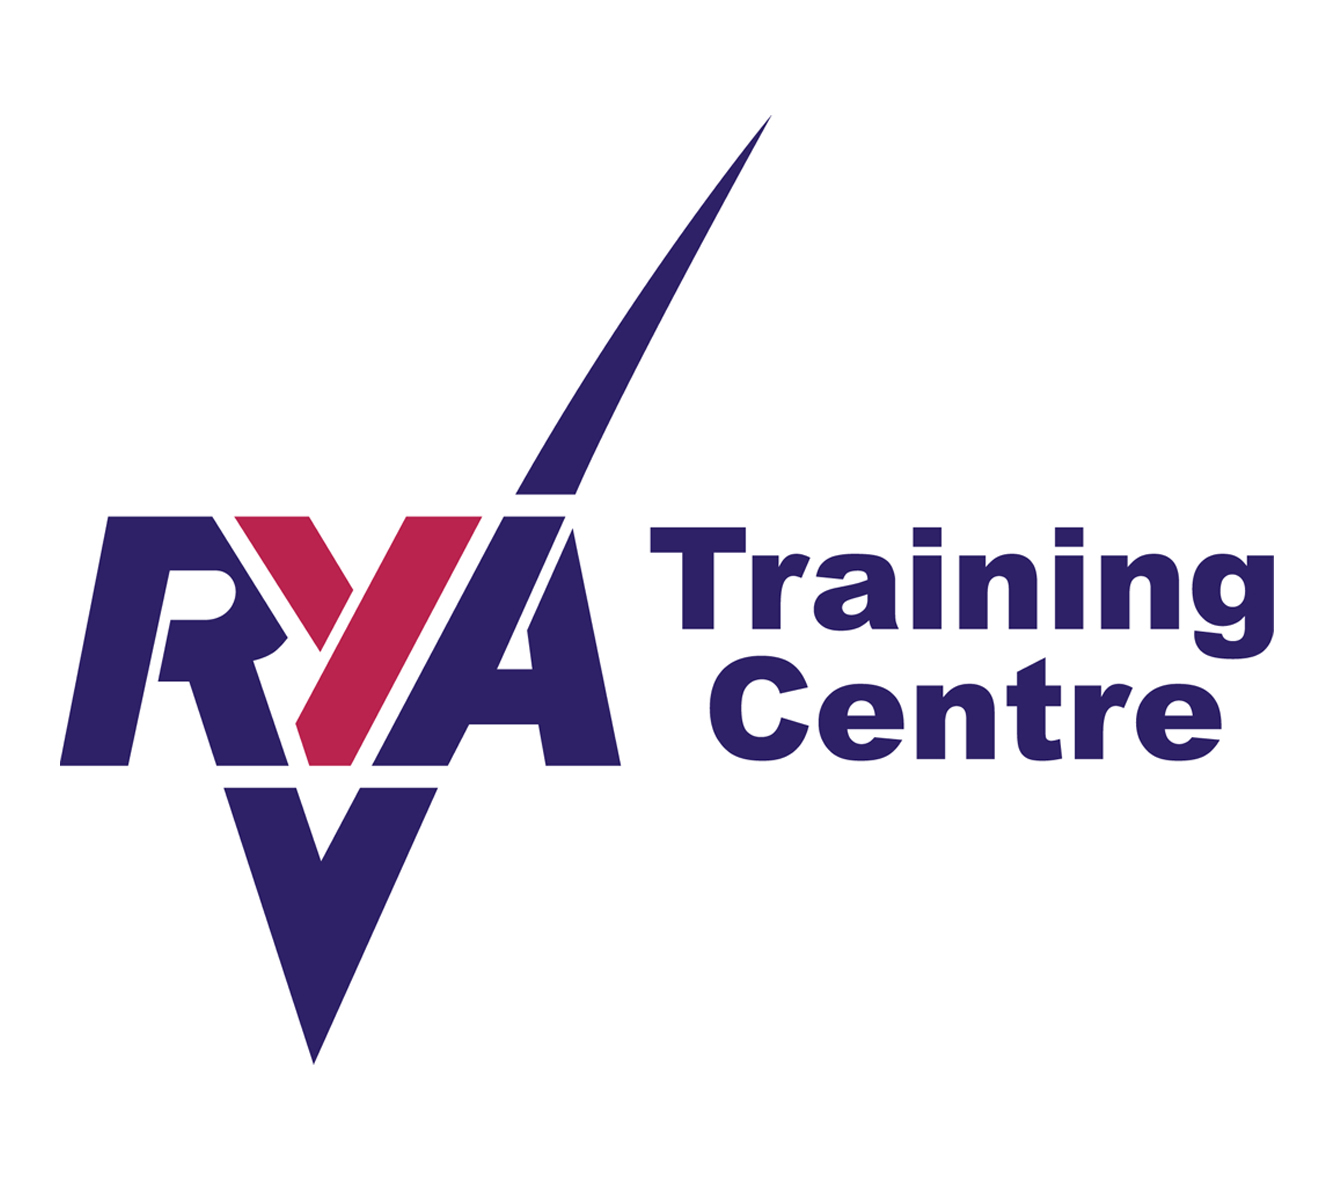 The Royal Yachting Association Training Centre